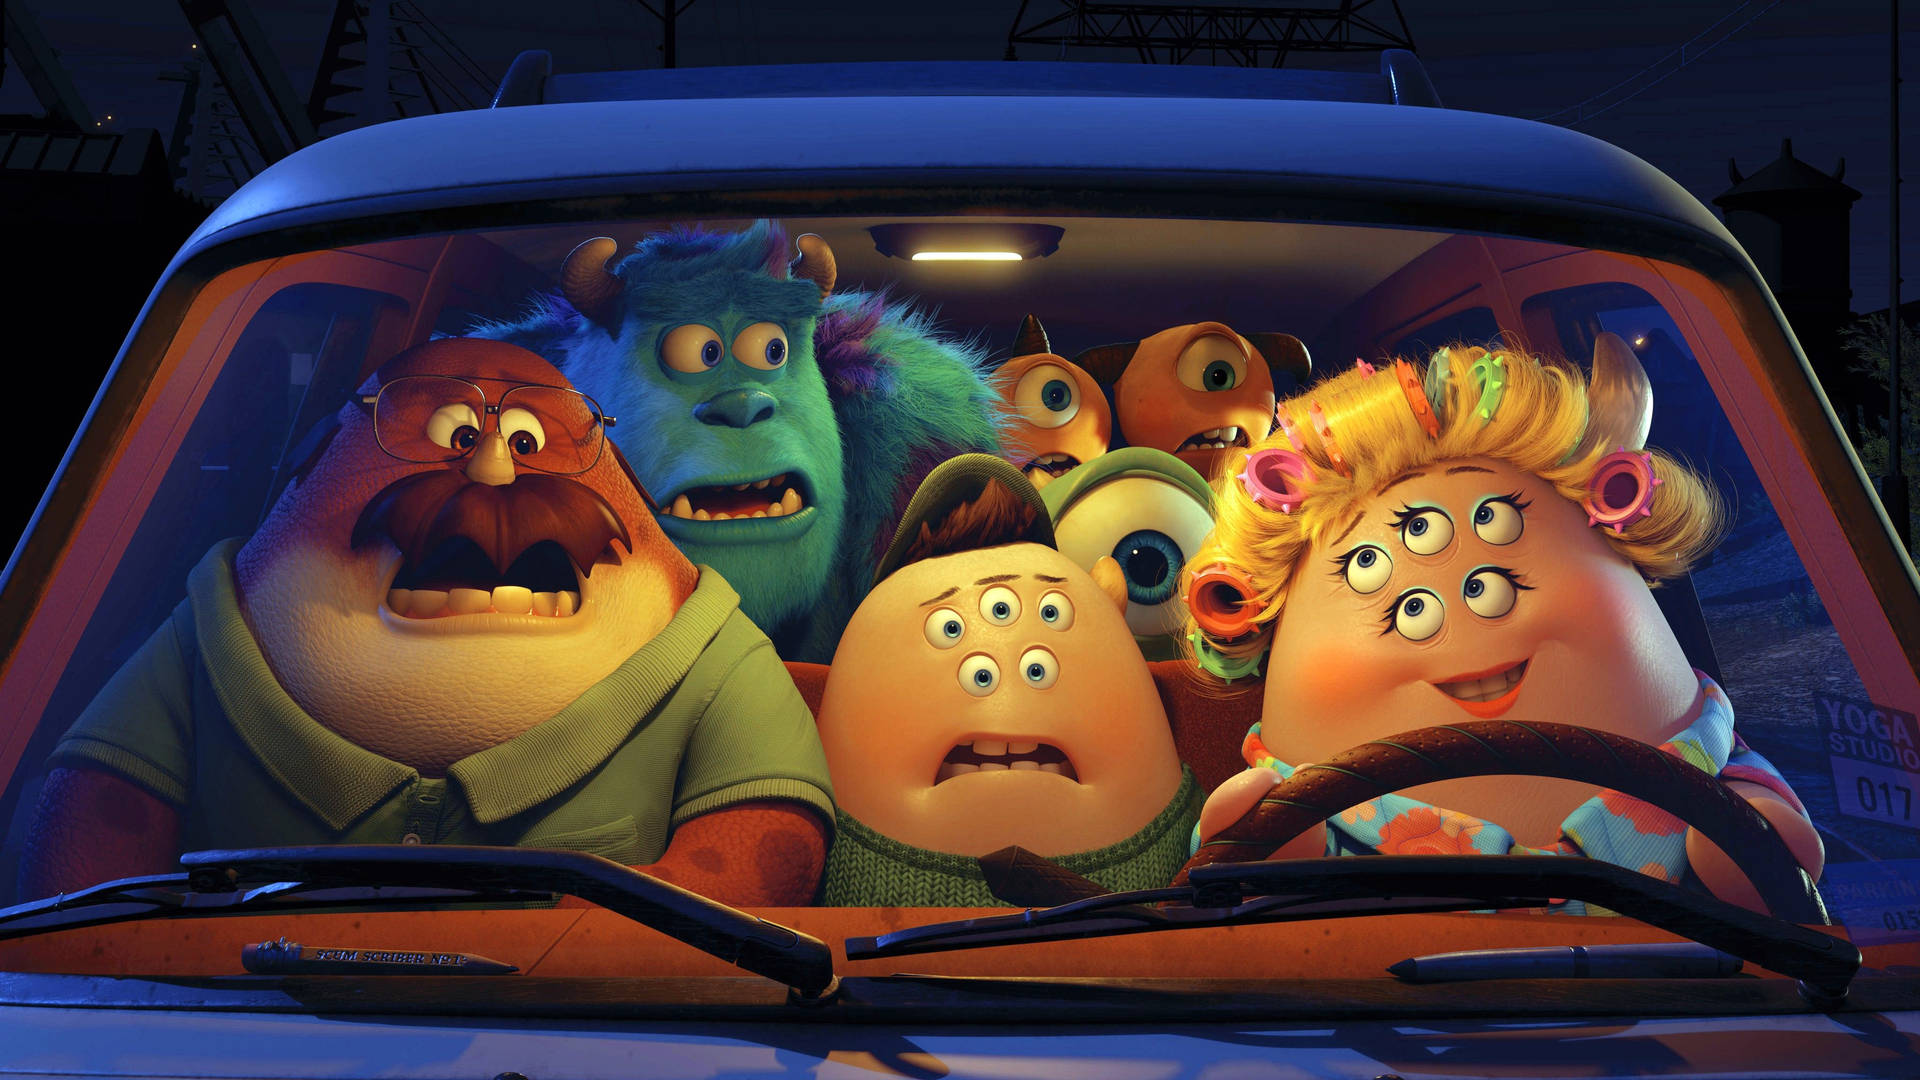 Sulley With Monsters In Car Background